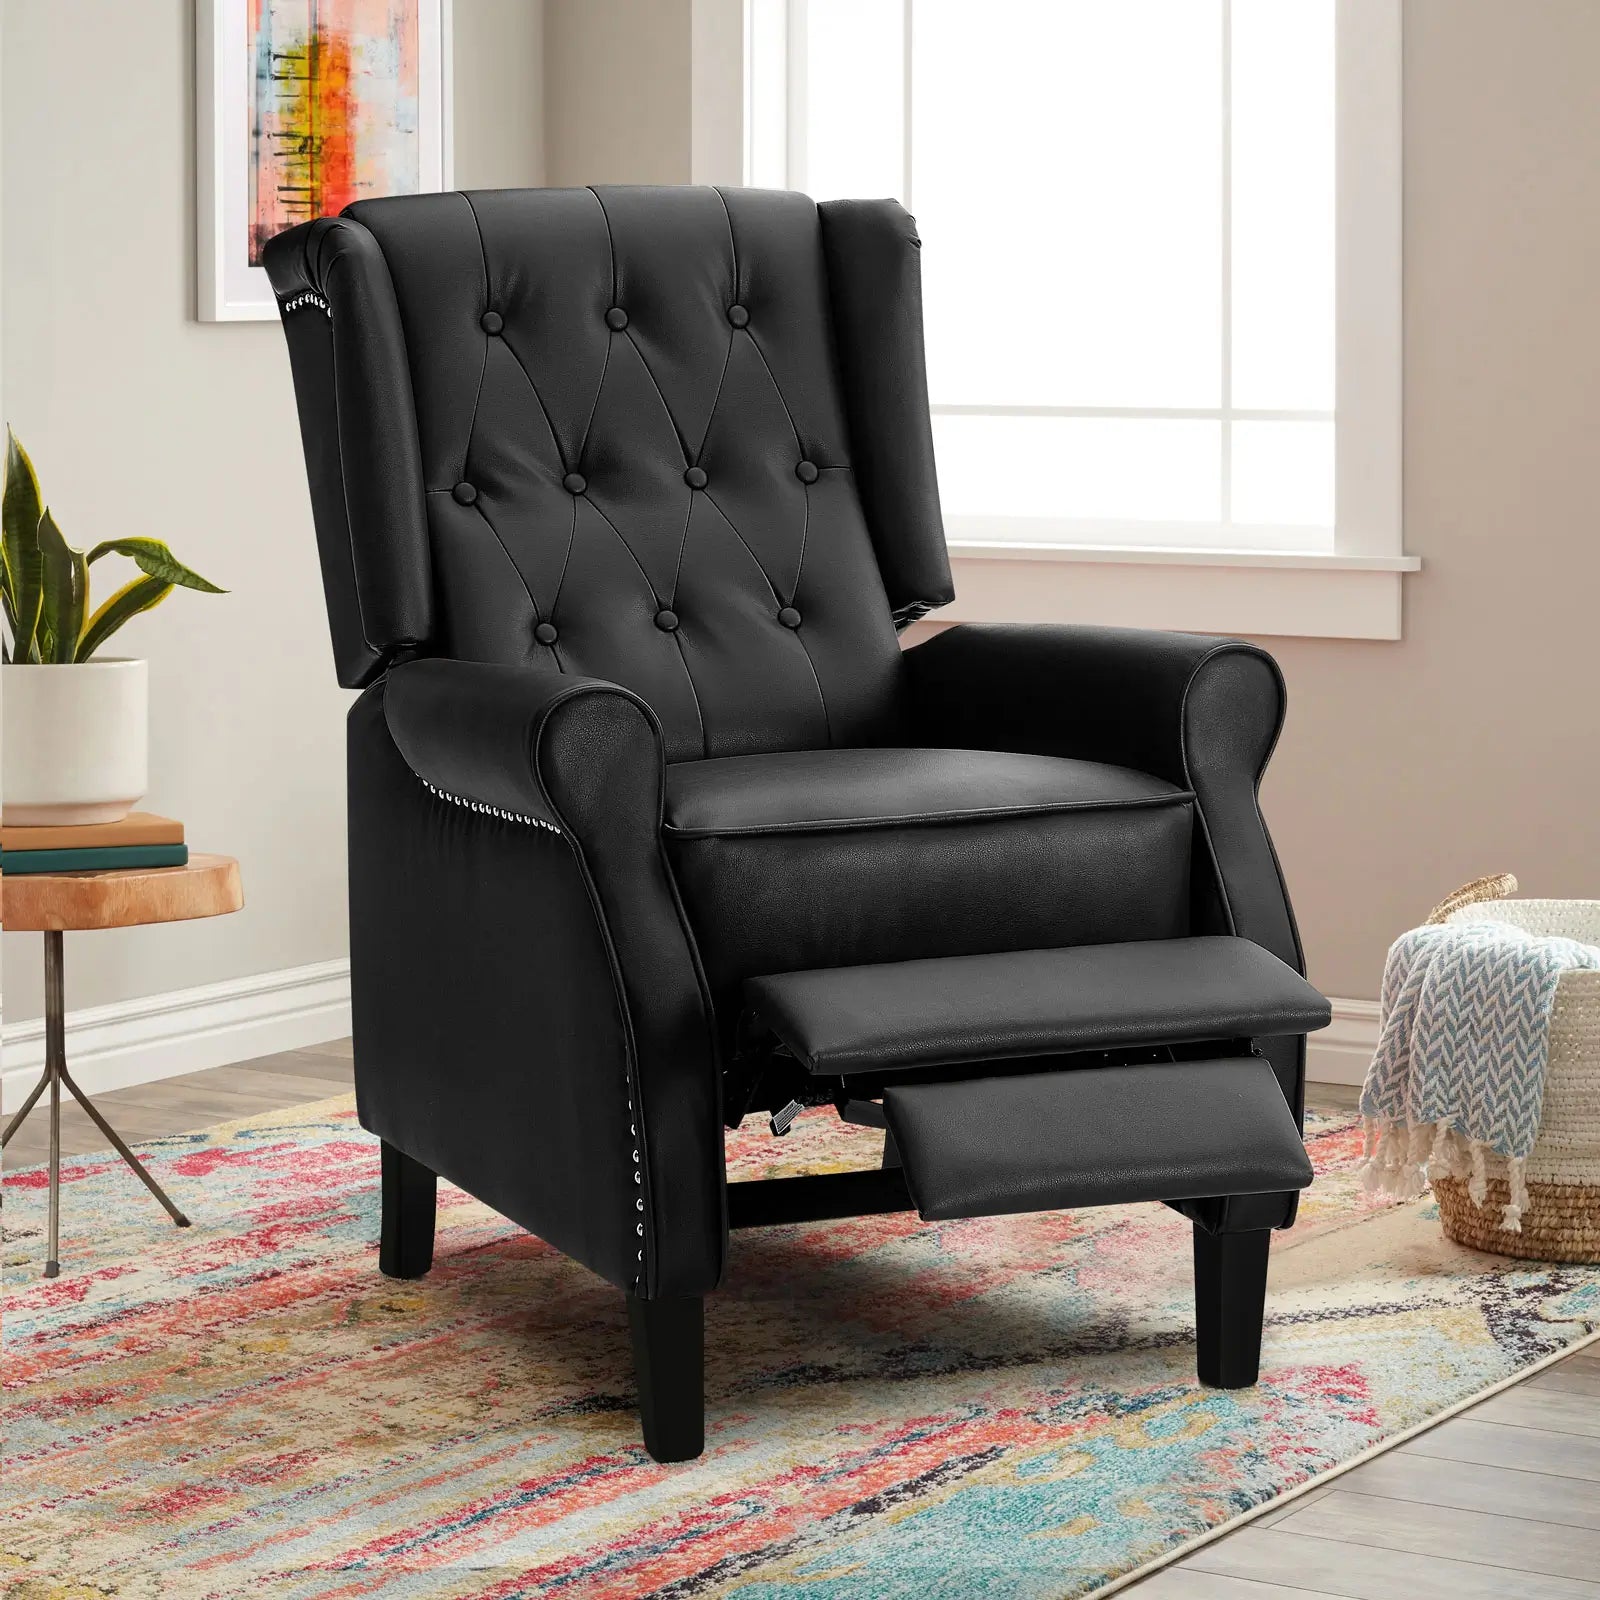 Tufted Faux Leather Wingback Chair Recliner,Black